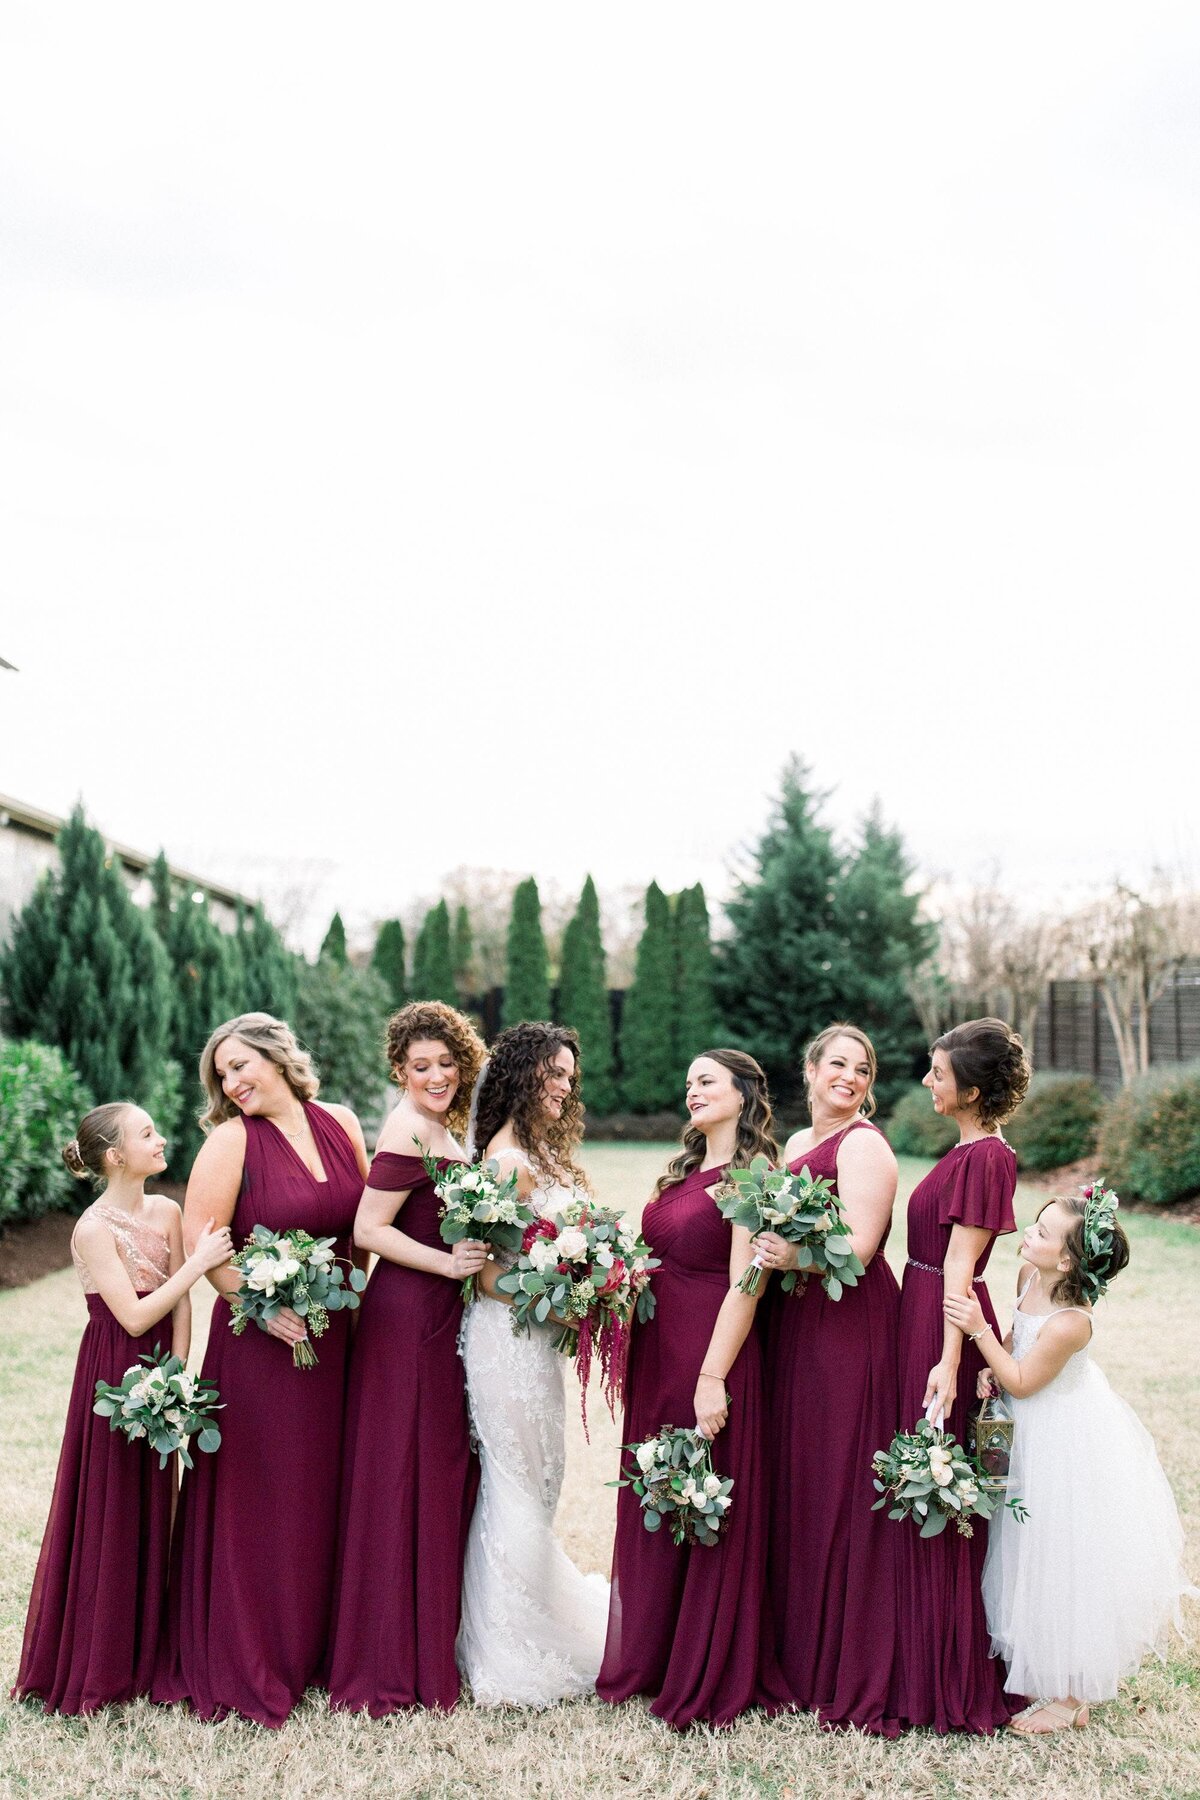 bride and her bridesmaids wearing burgundy dresses holding bouquets in white and burgundy